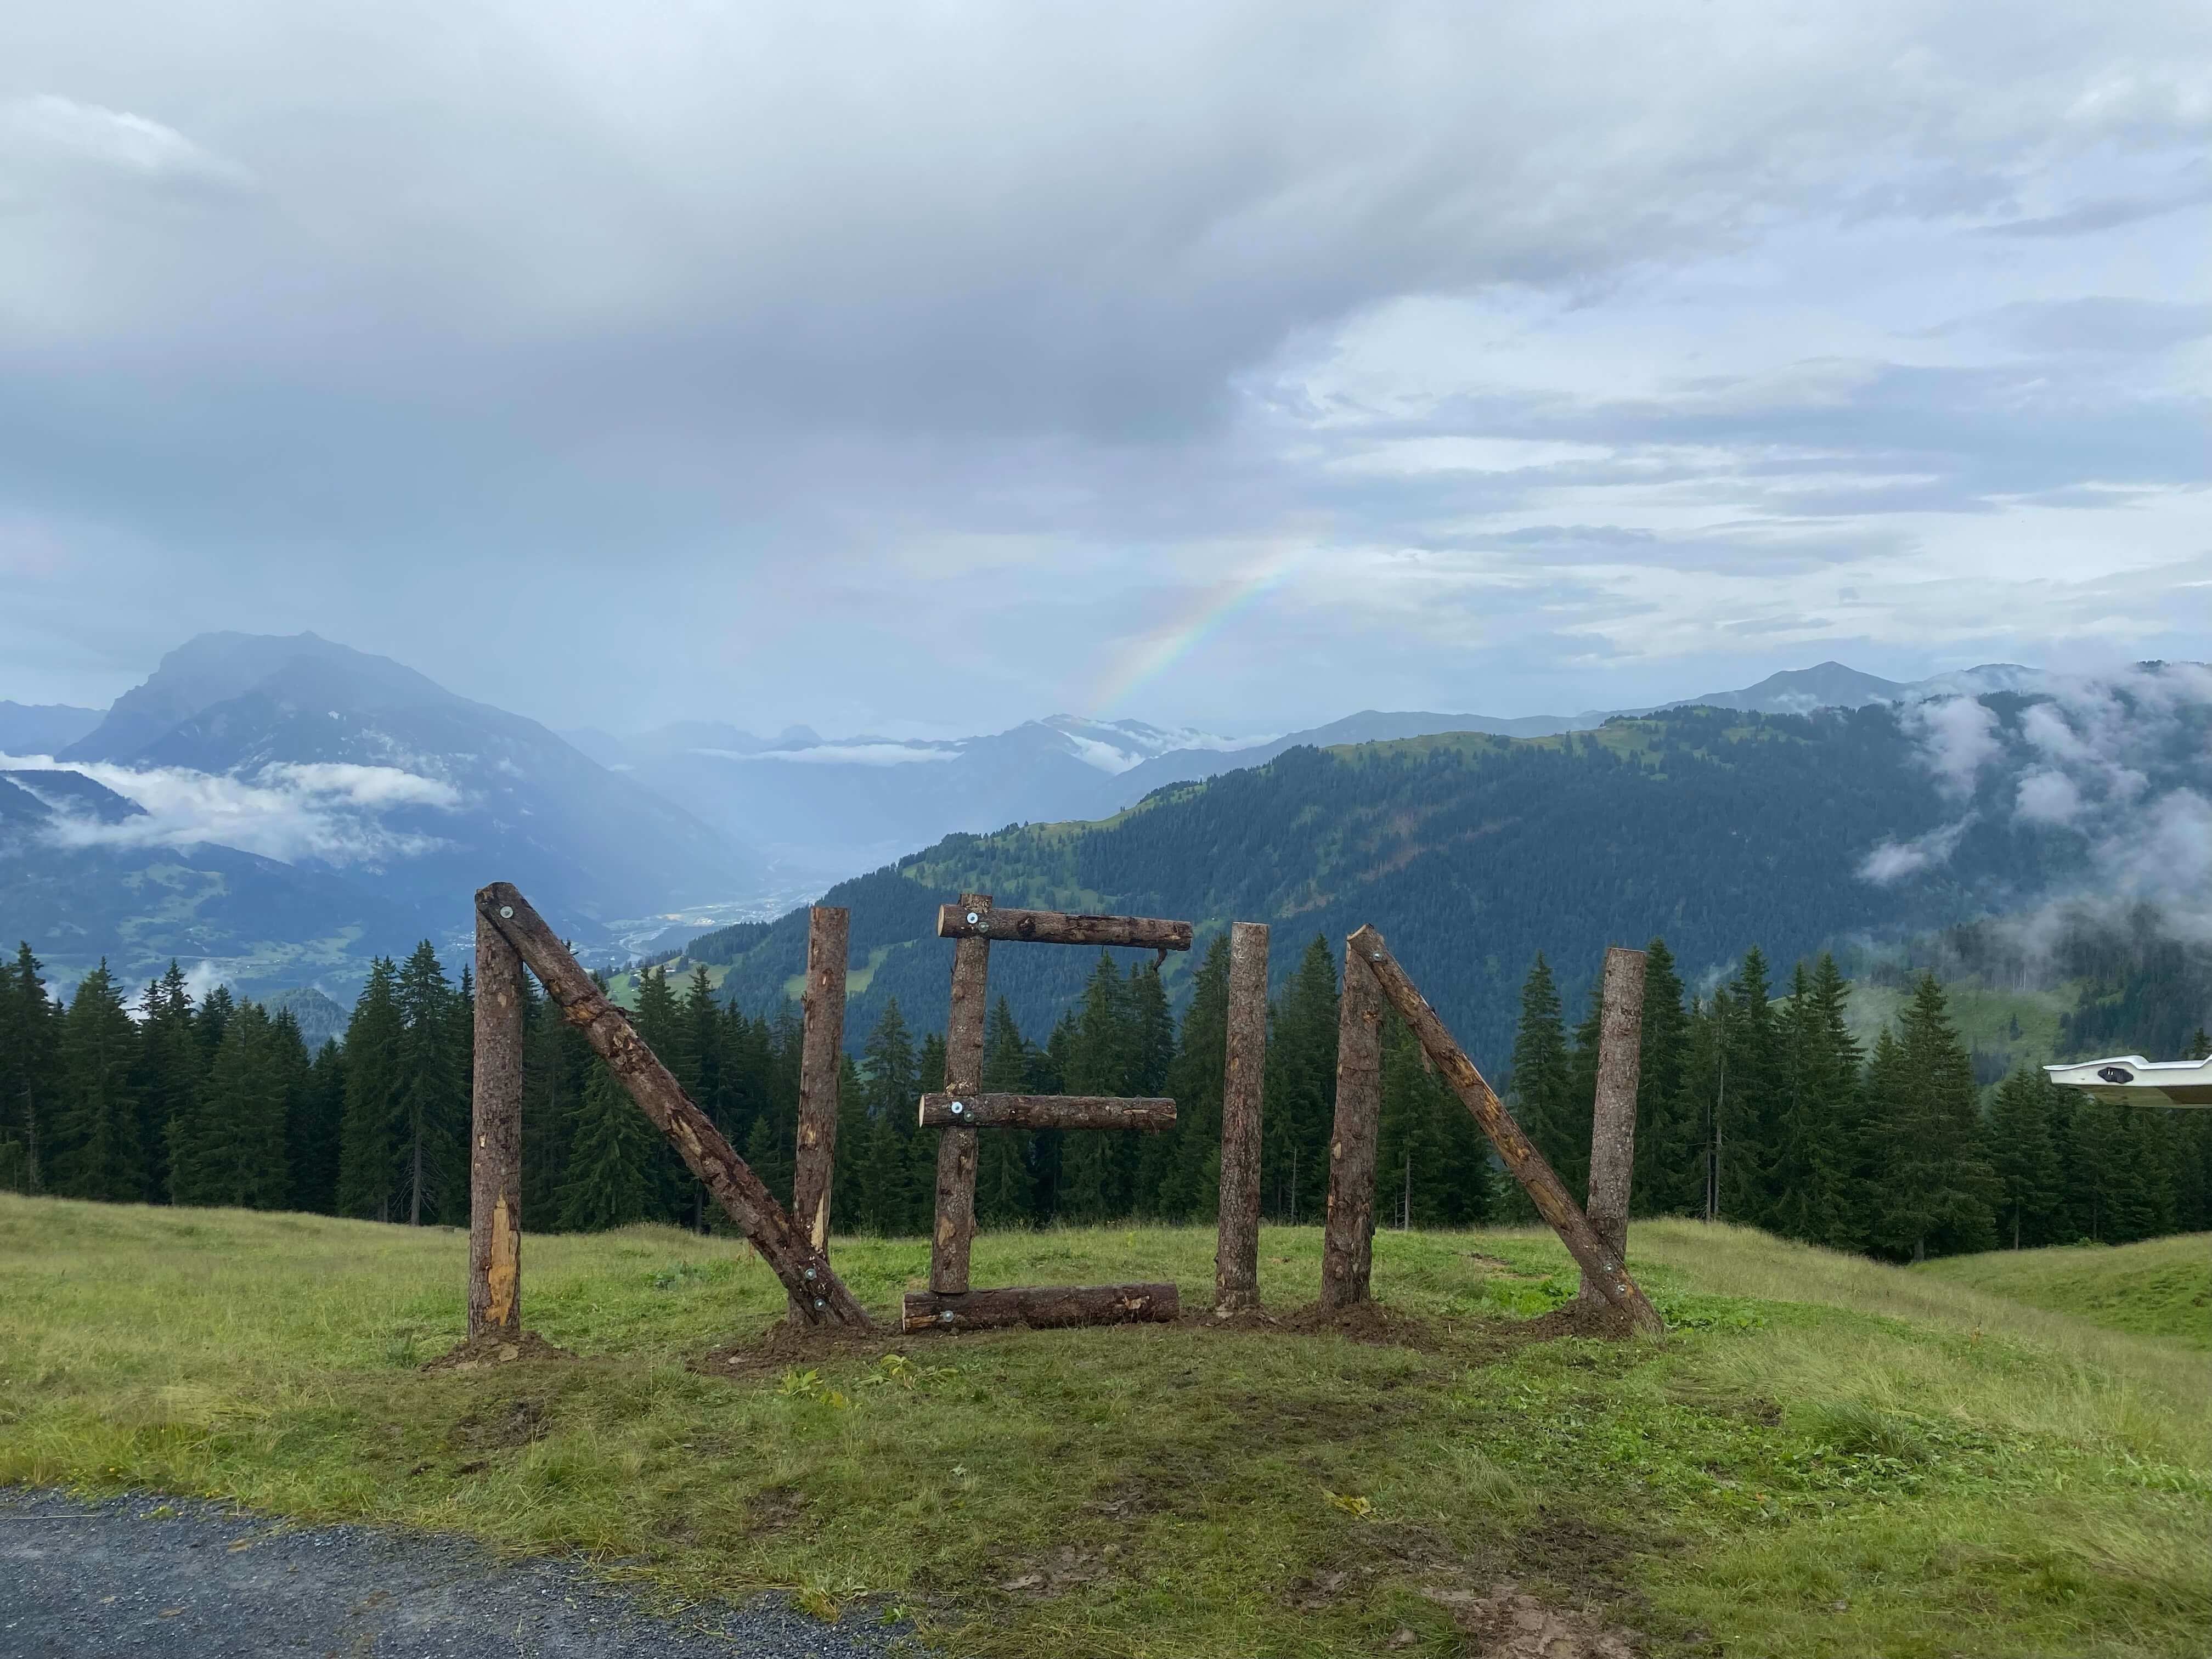 Nein formed from logs in the Swiss alps